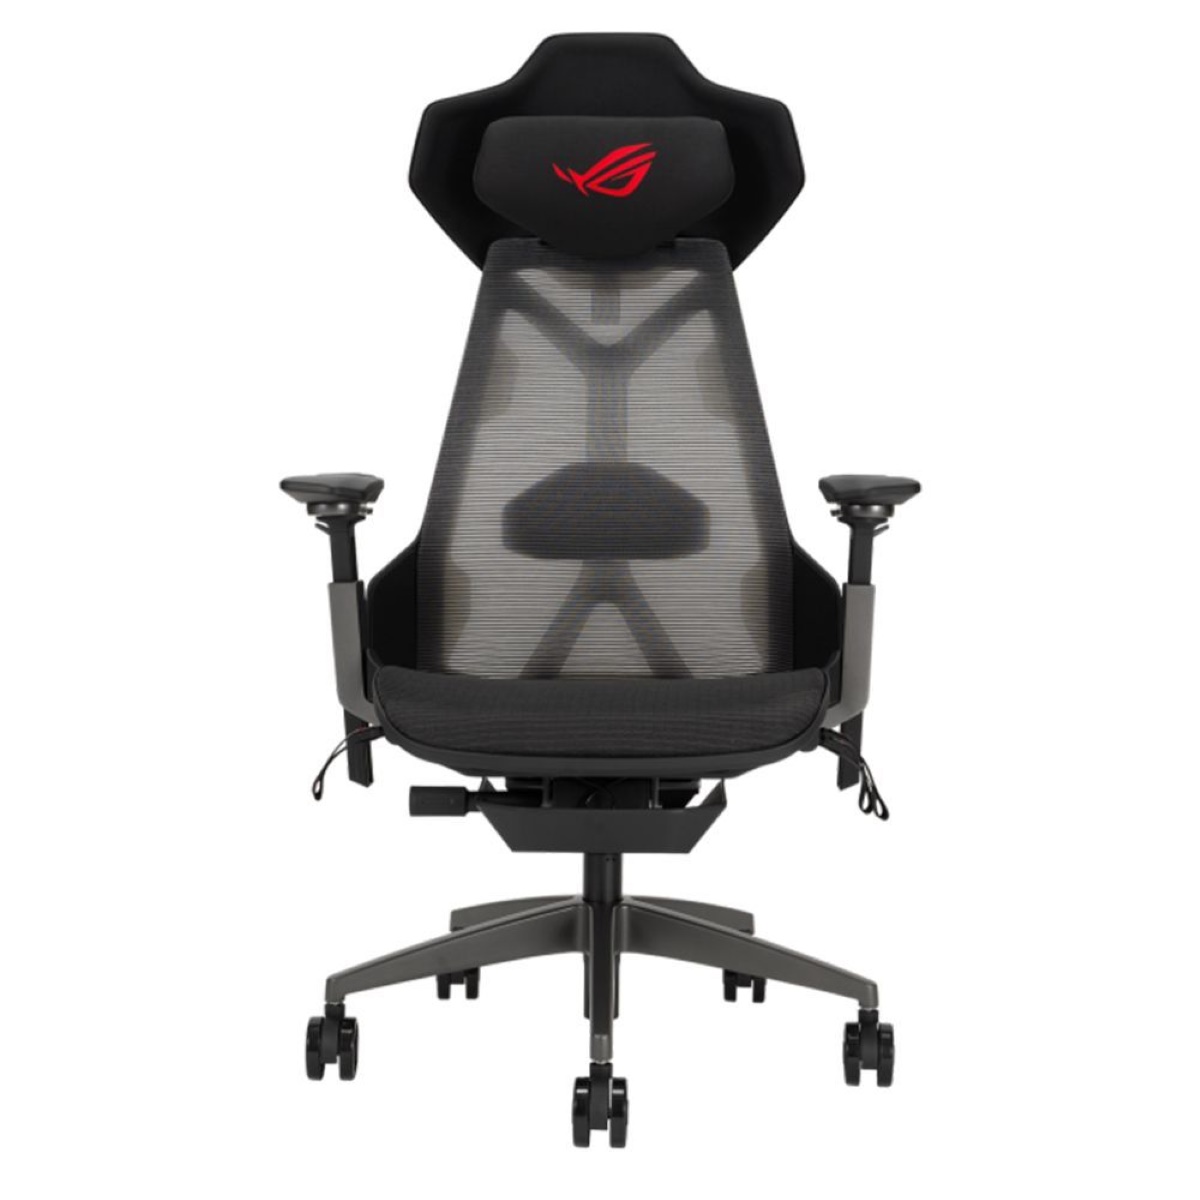 How Much For A Gaming Chair